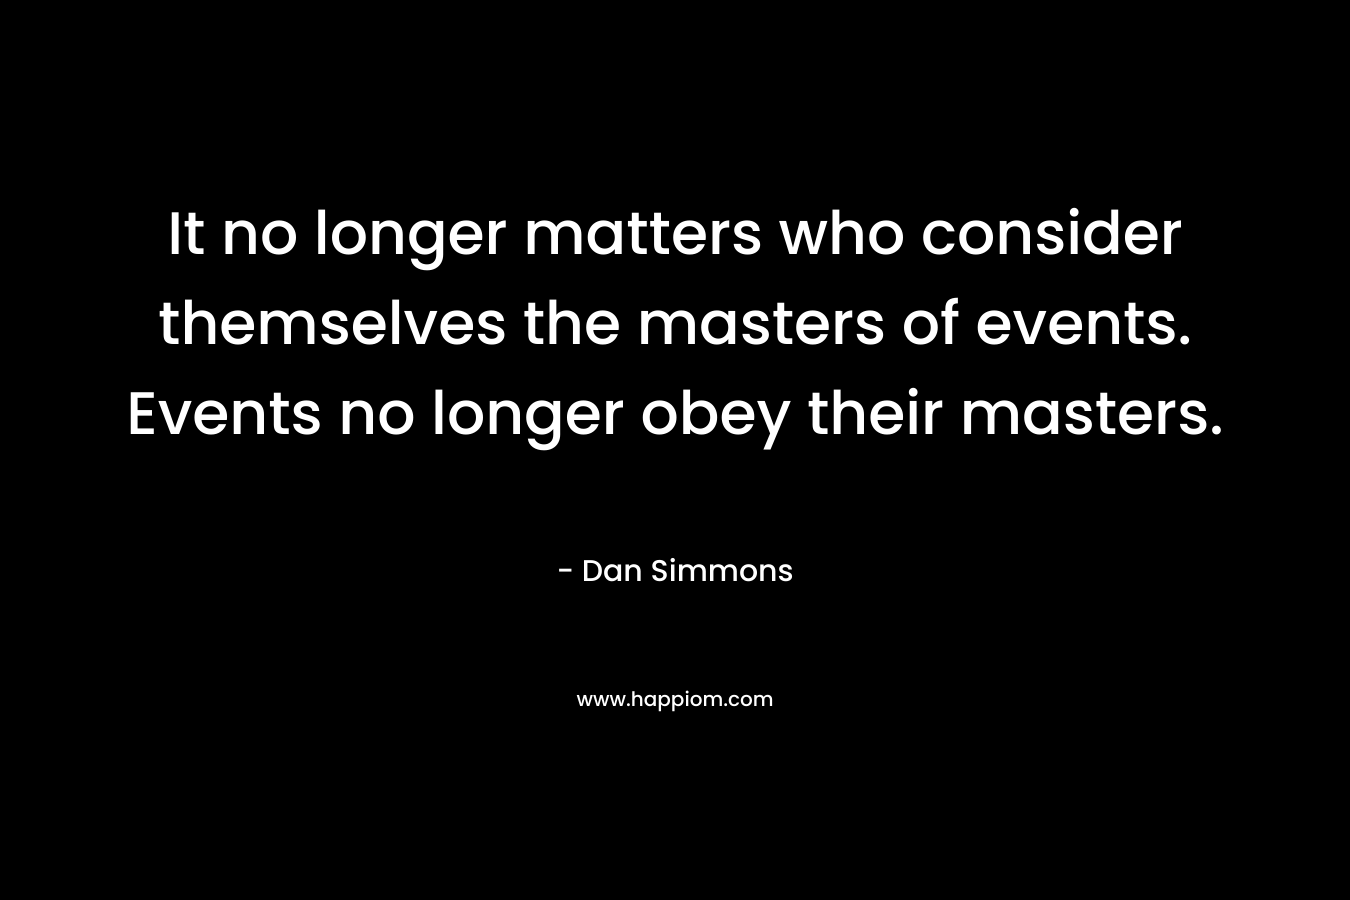 It no longer matters who consider themselves the masters of events. Events no longer obey their masters. – Dan Simmons